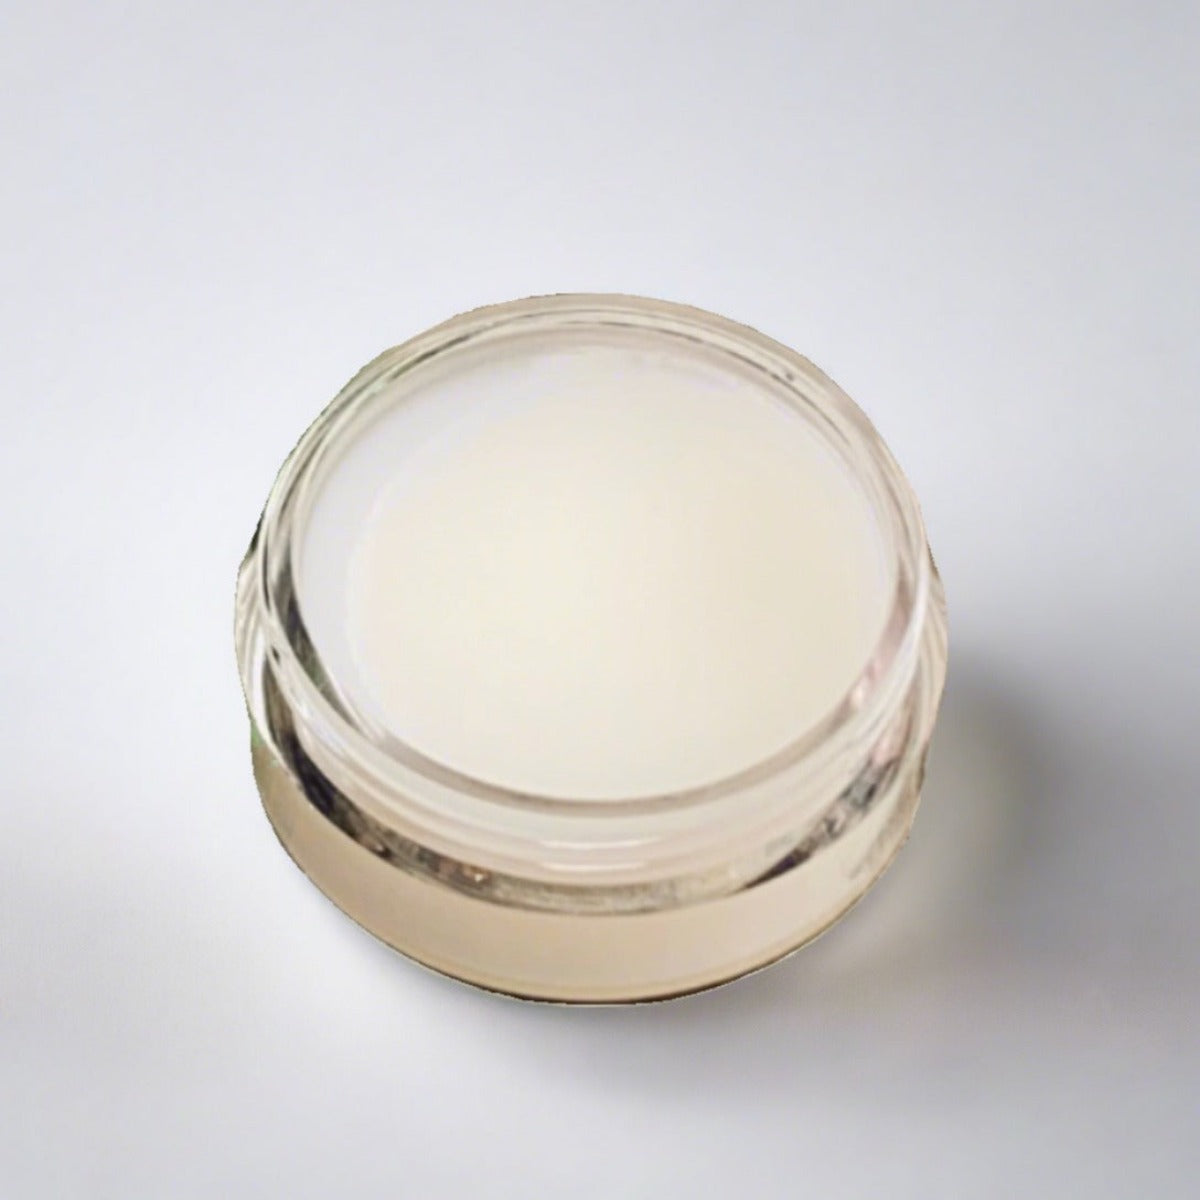 Cosmetic jar of argan eye balm showcasing its color and texture